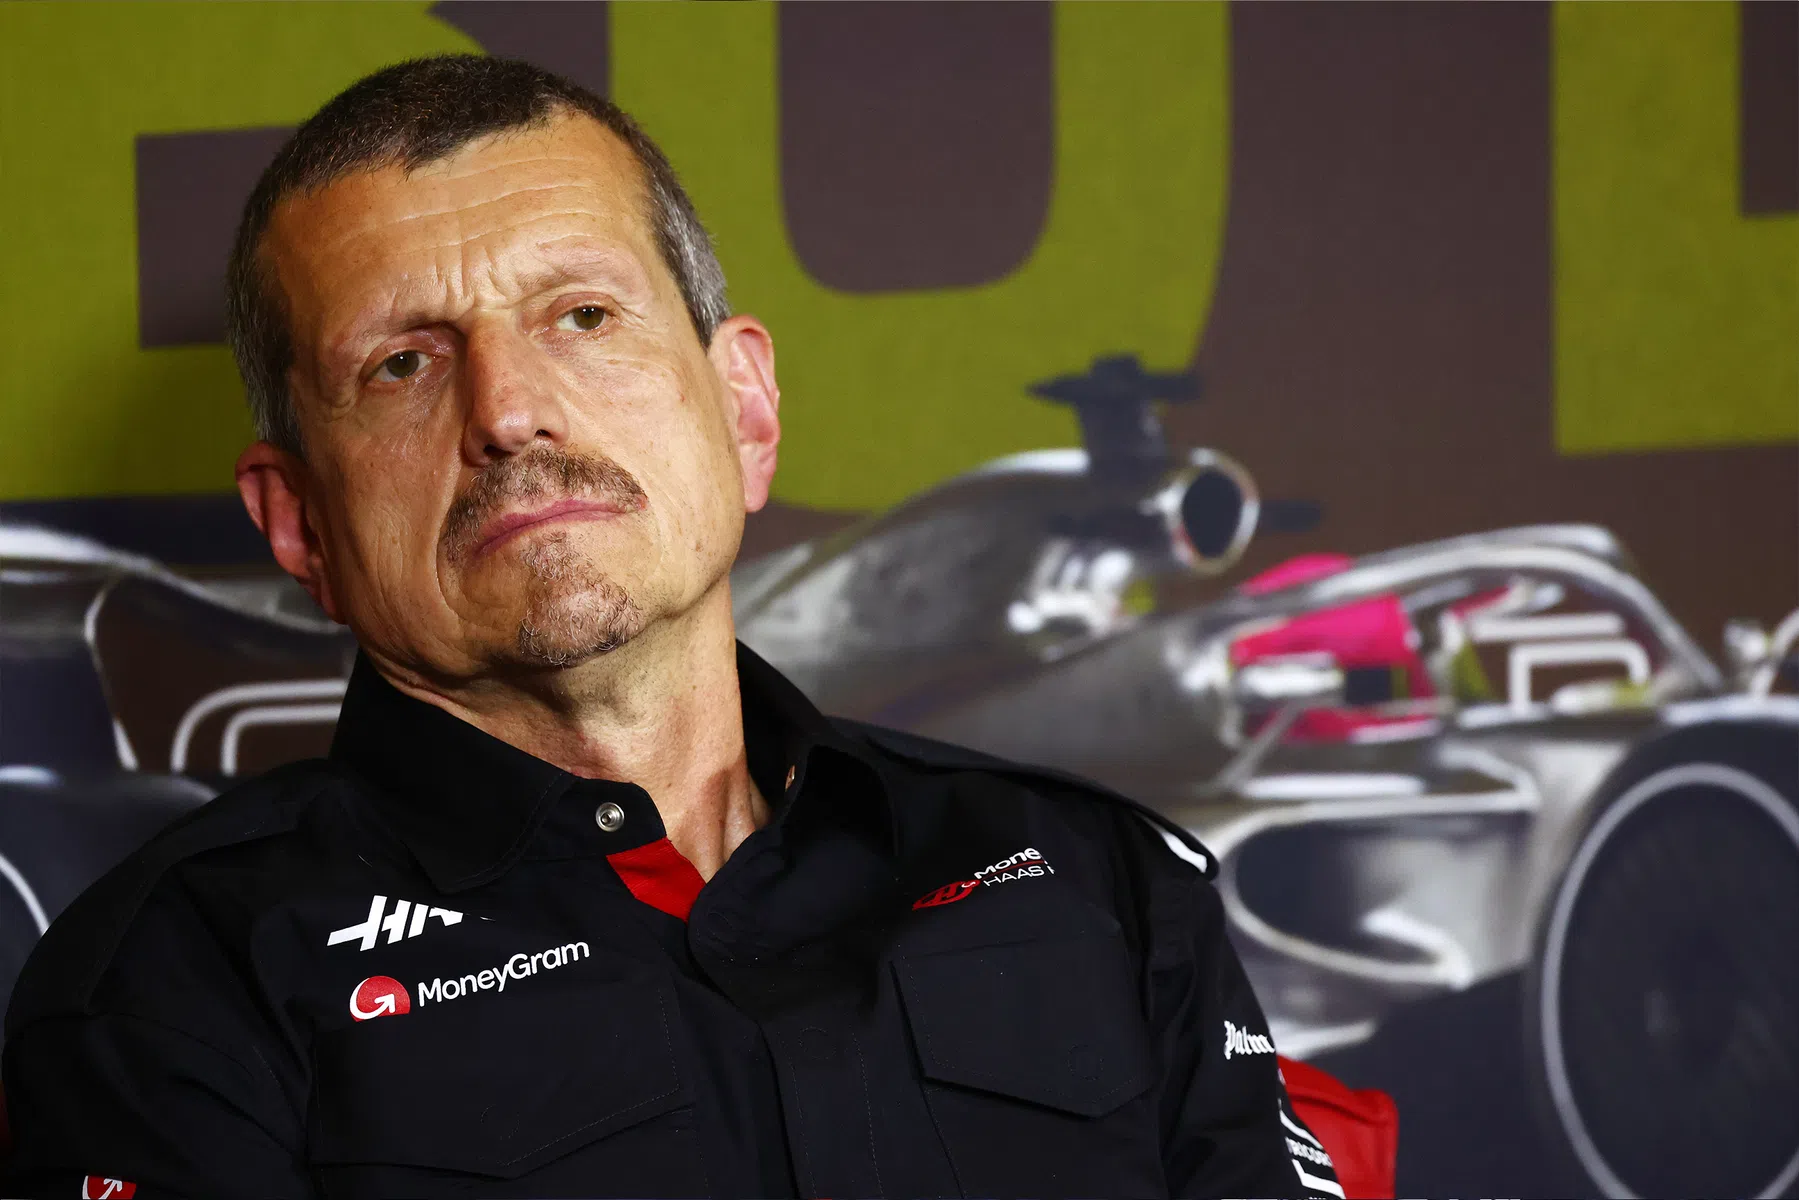 Confirmed: Guenther Steiner has left Haas F1 team